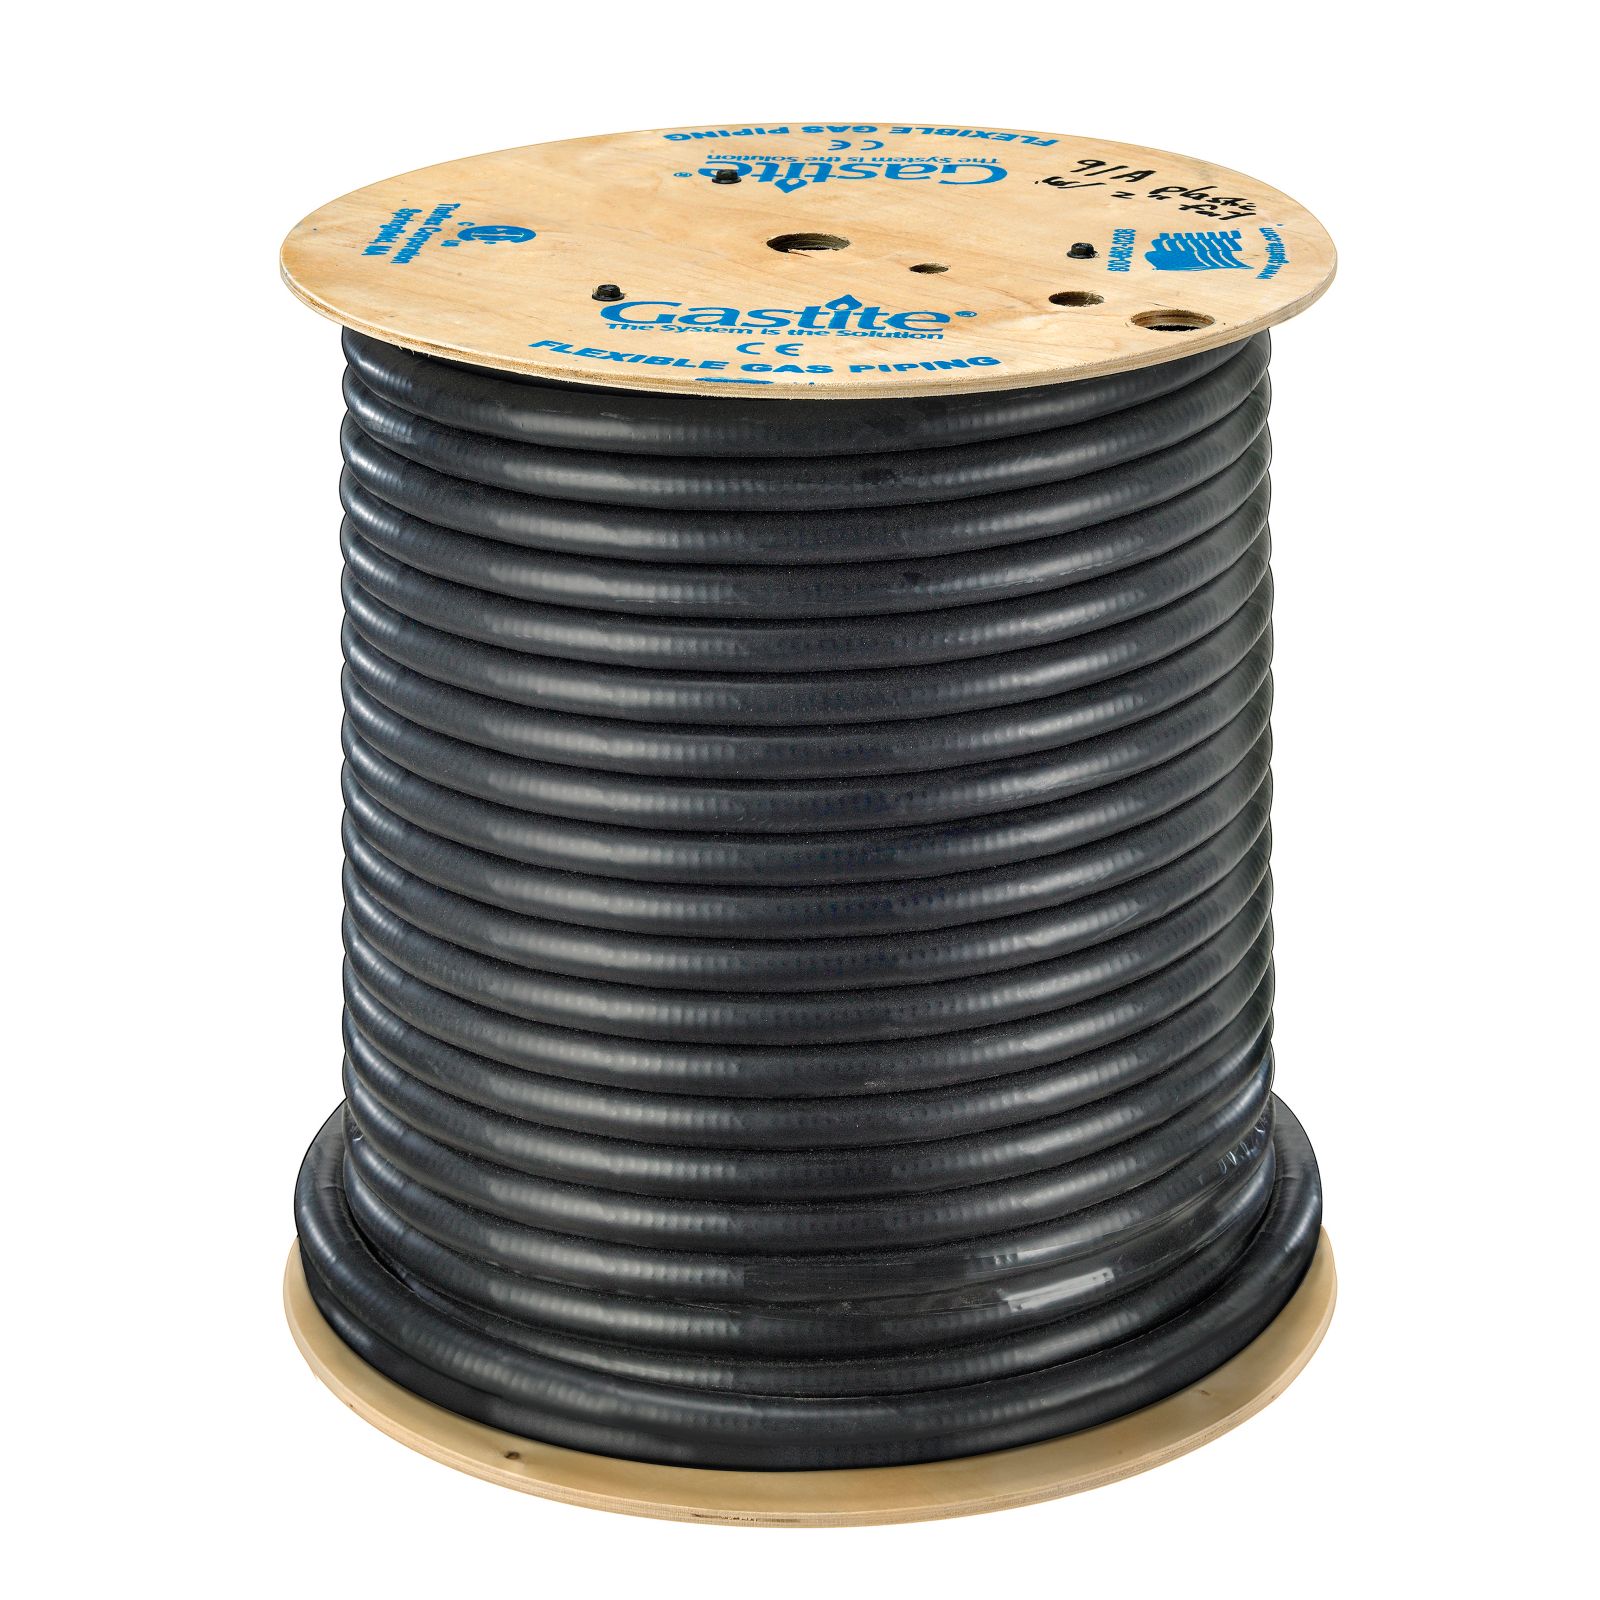 Gastite FS-8-250 - 1/2" FlashShield Corrugated Stainless Steel Tubing (CSST) 250' Coil